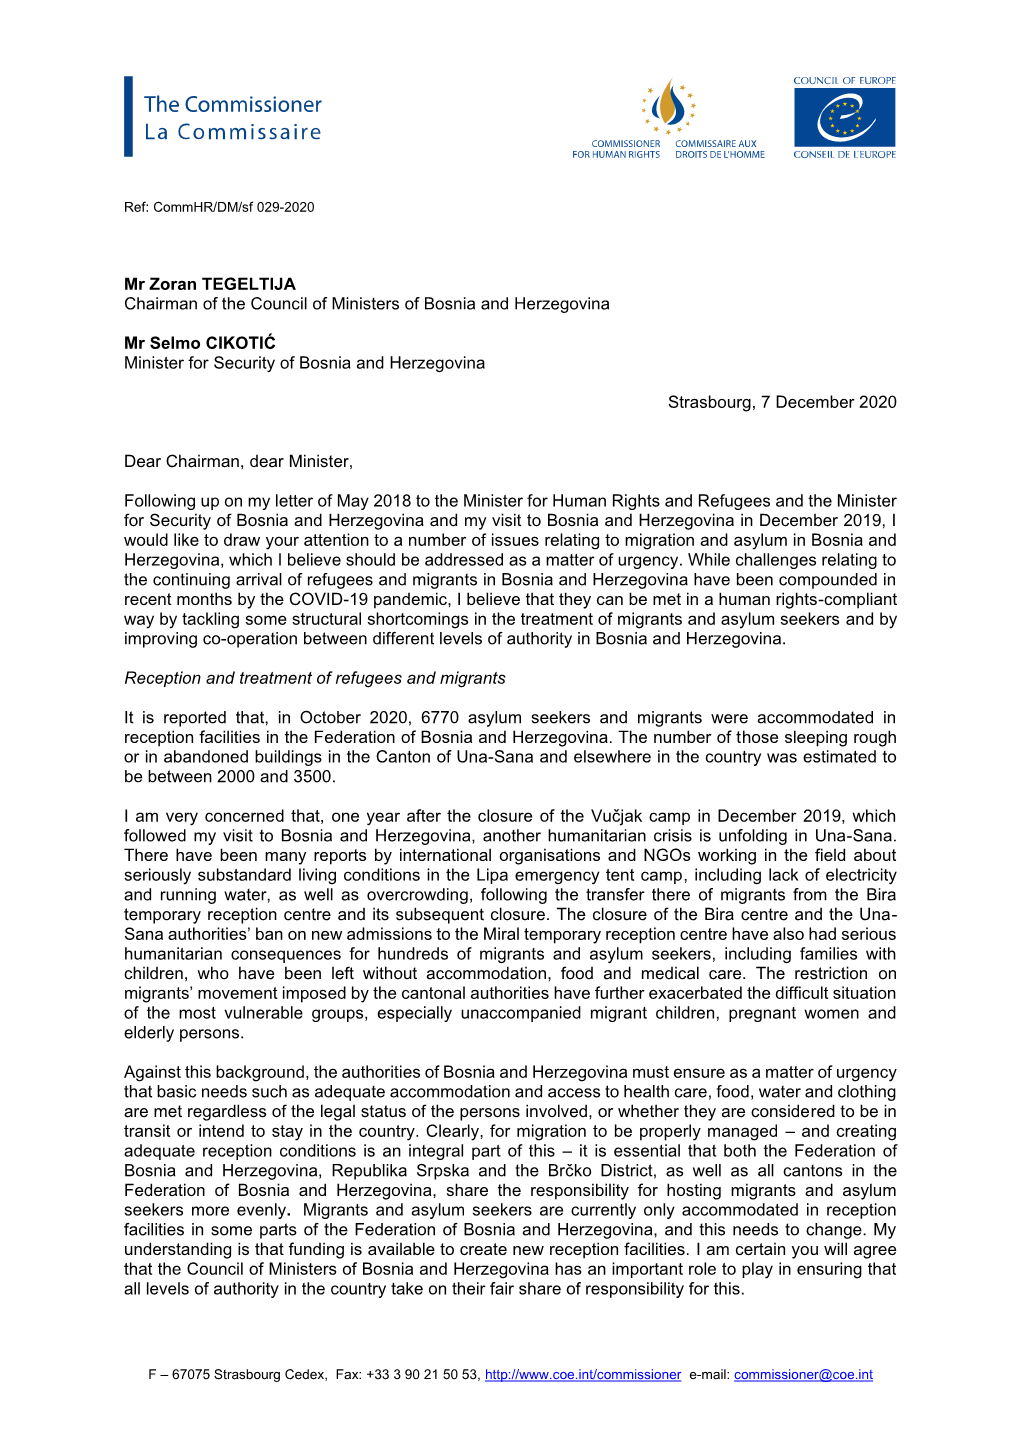 Commhr Letter to Bosnian Ministers